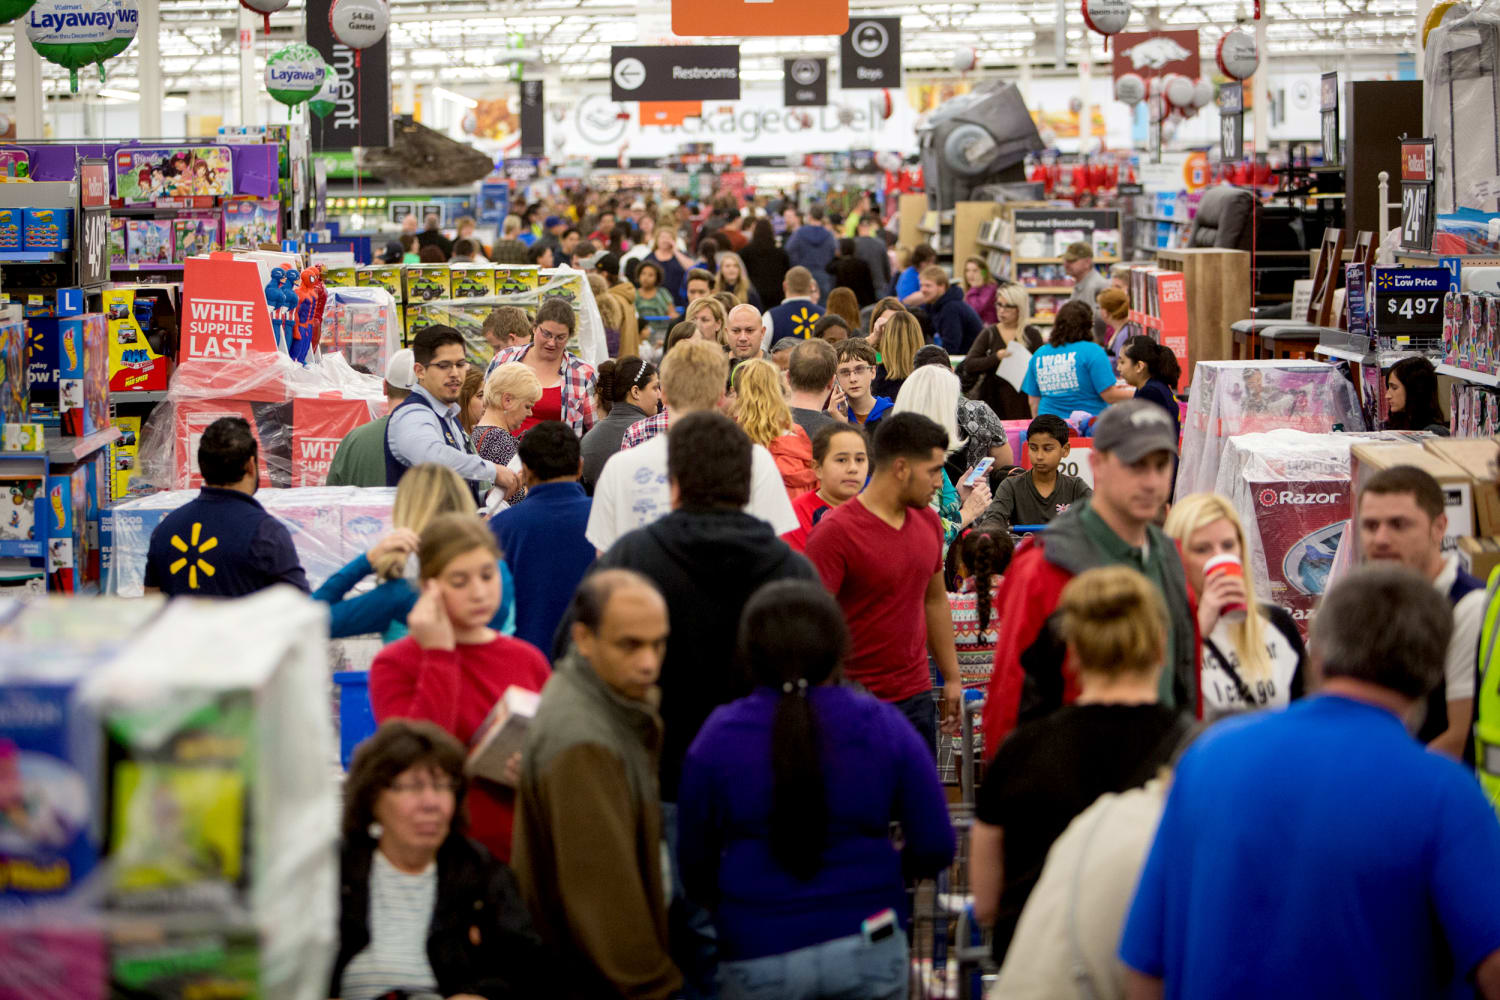 Move over Amazon, 'Black Friday in July' sales are heating up.